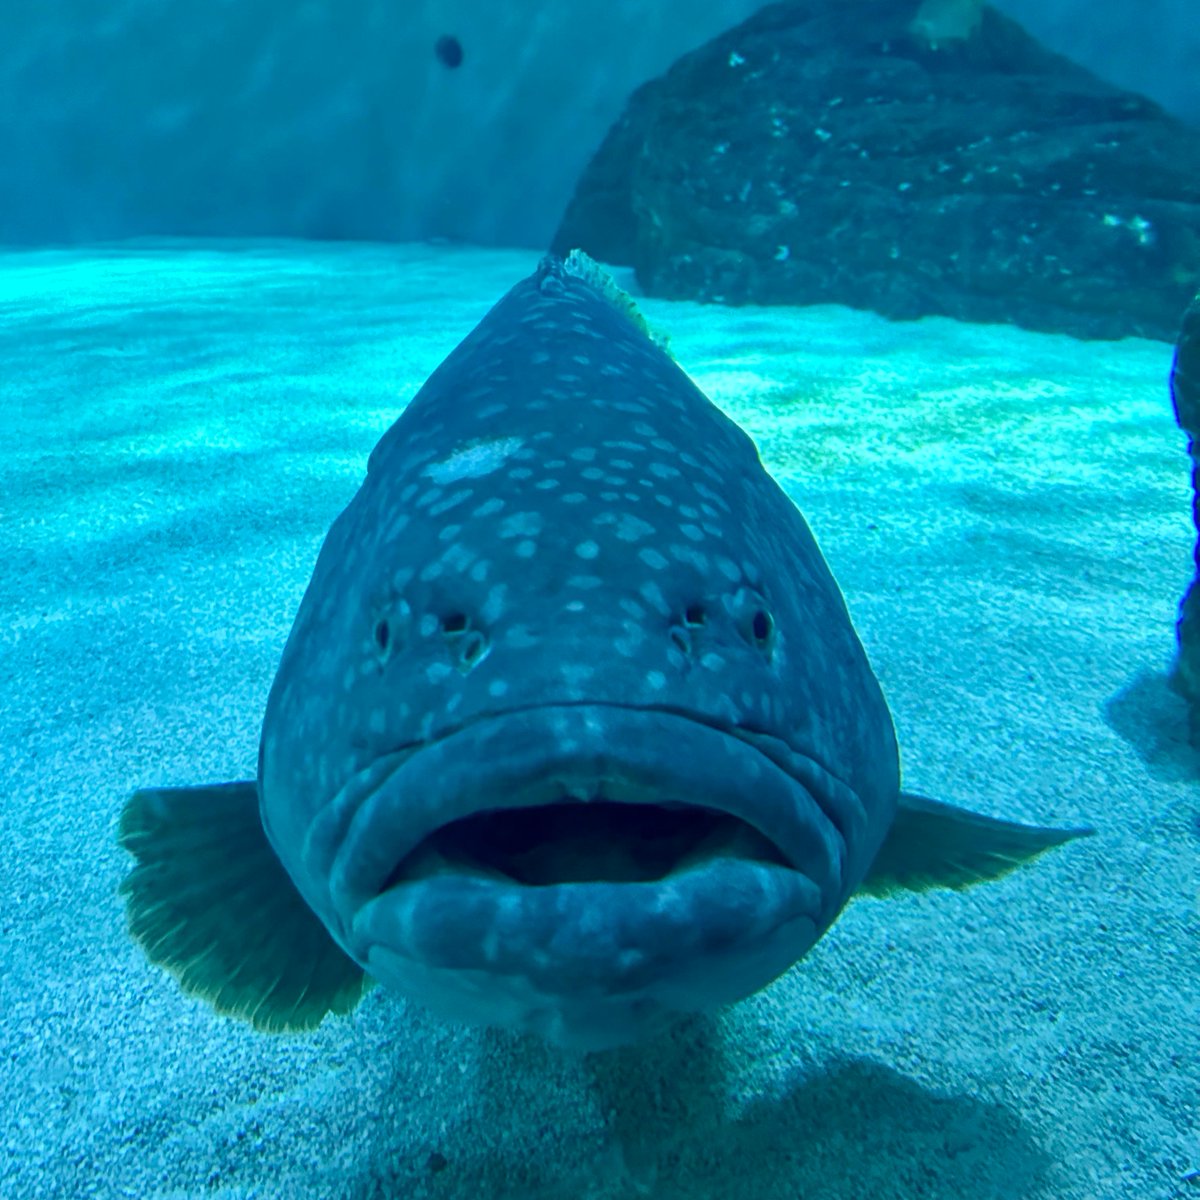 Mondays can be described by the Queensland grouper fish. 😒 🐟